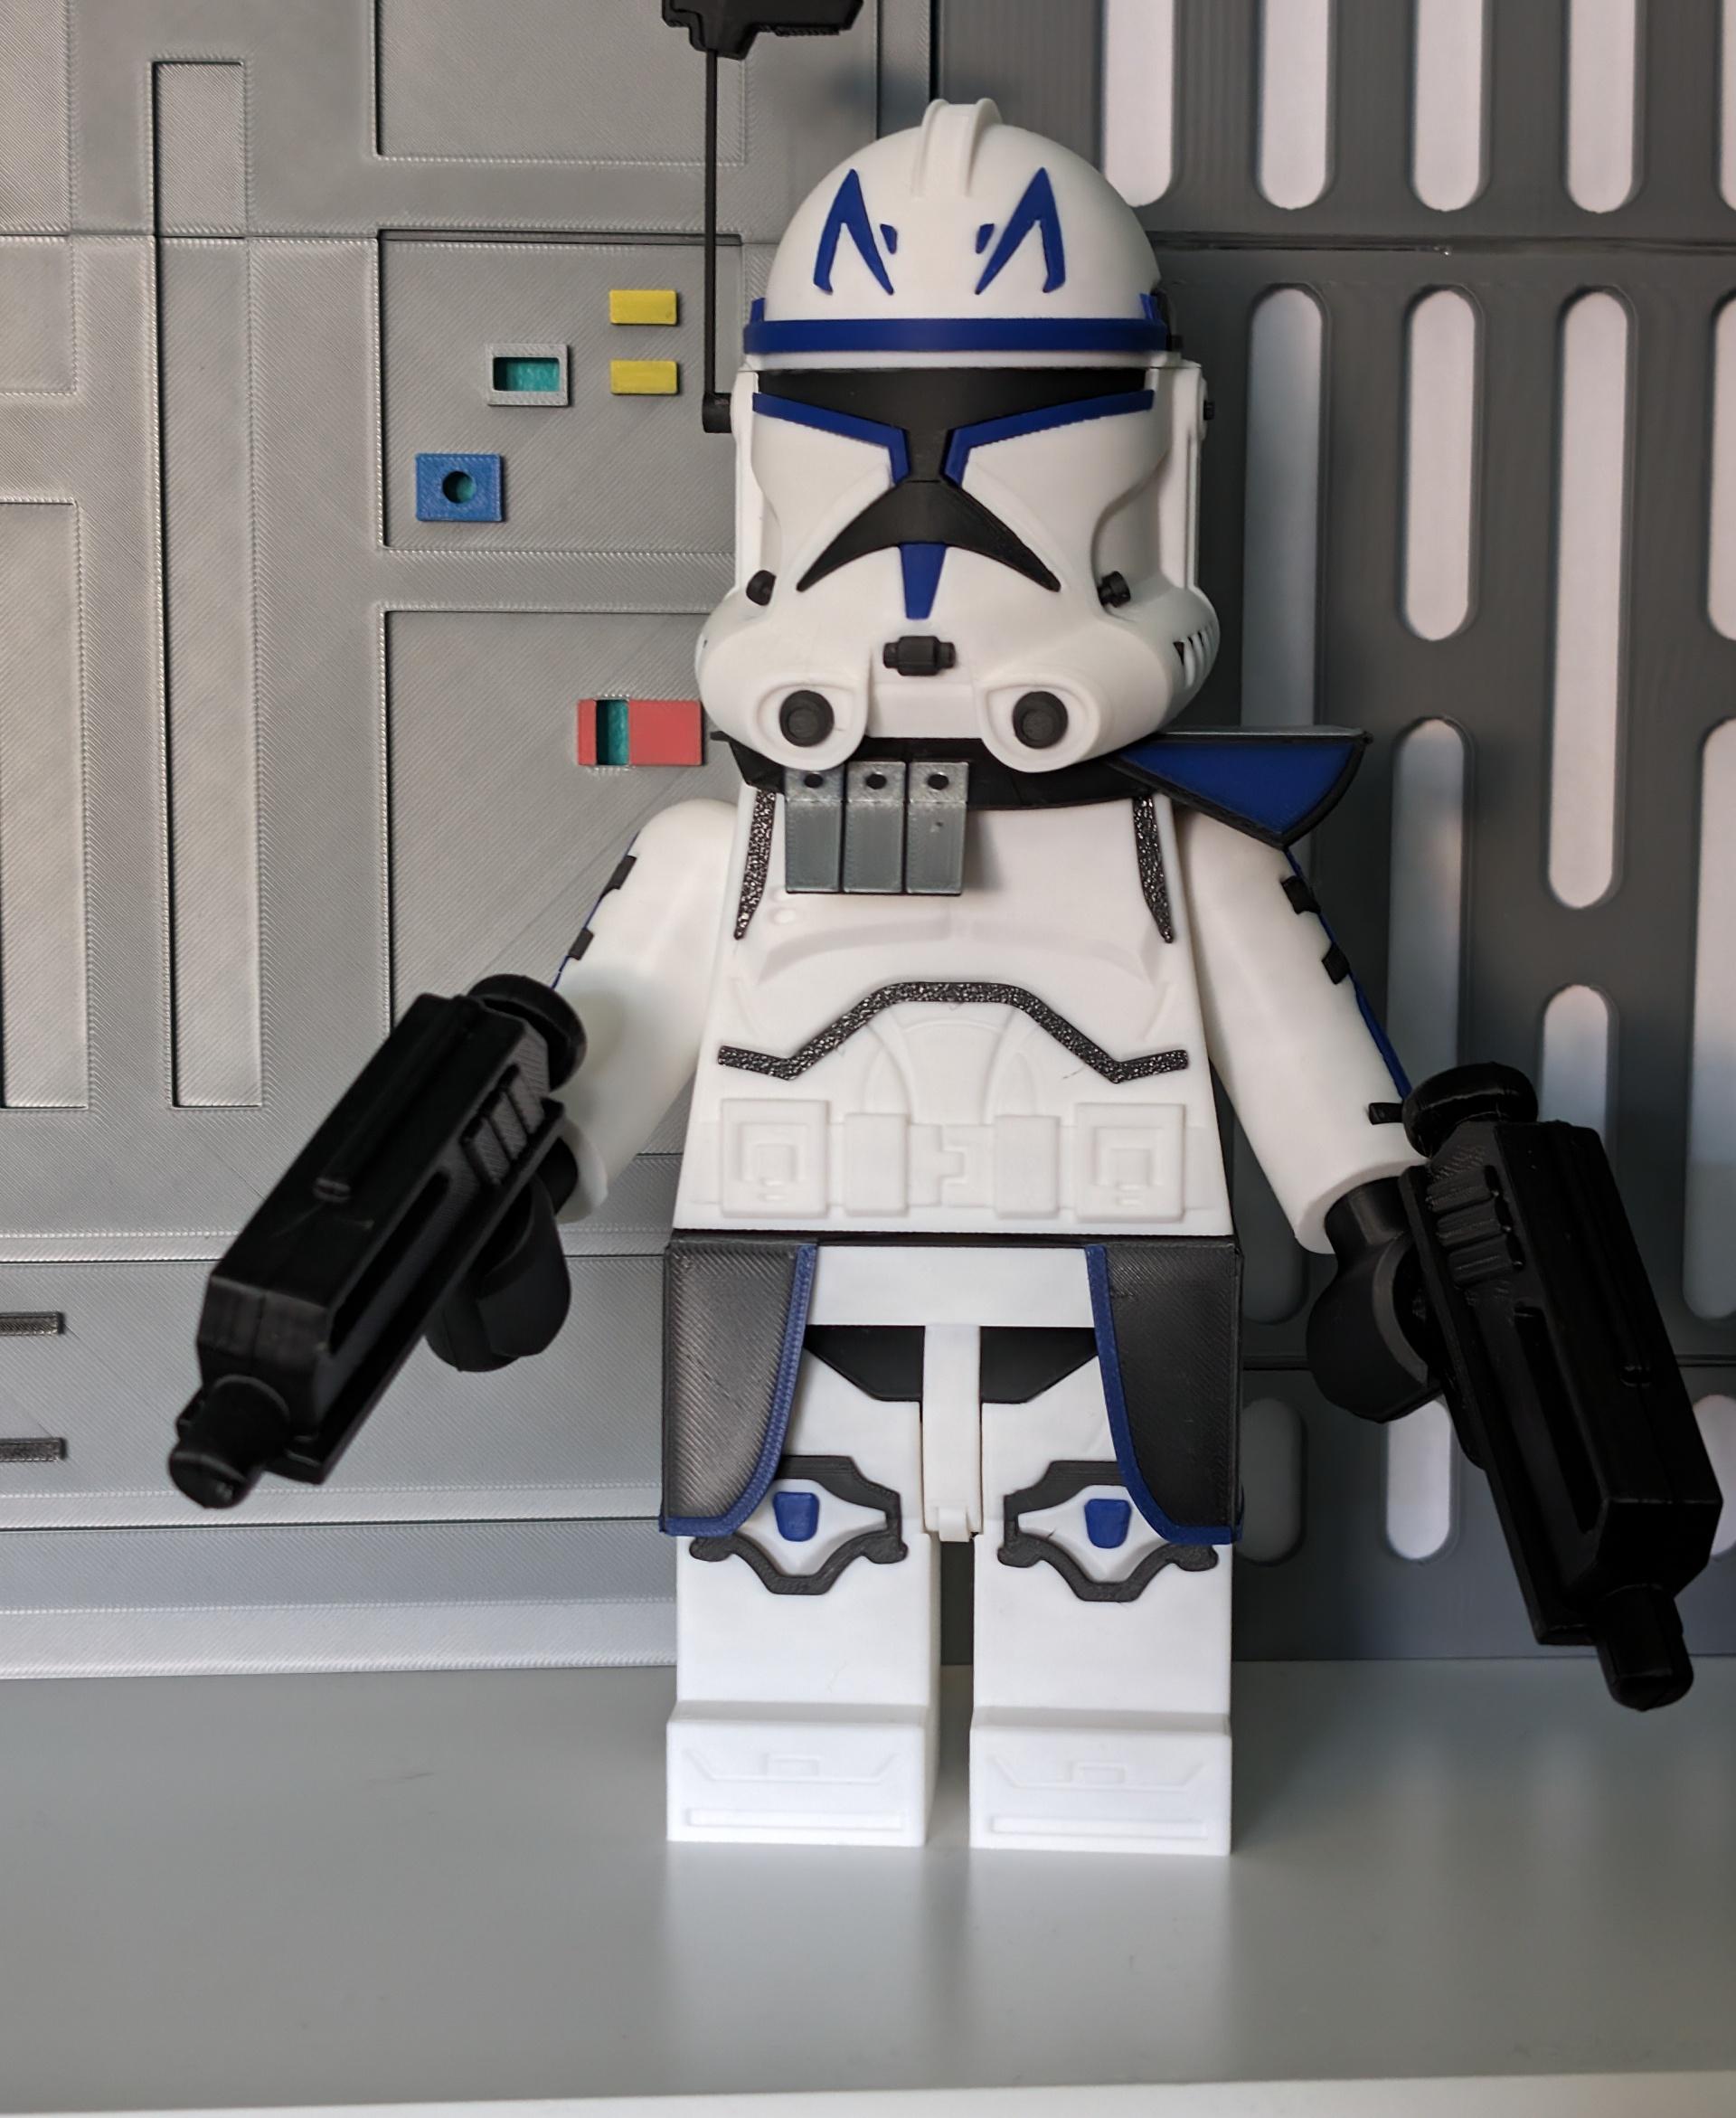 Captain Rex (6:1 LEGO-inspired brick figure, NO MMU/AMS, NO supports, NO glue) - One of the best models I have had the pleasure to print. - 3d model